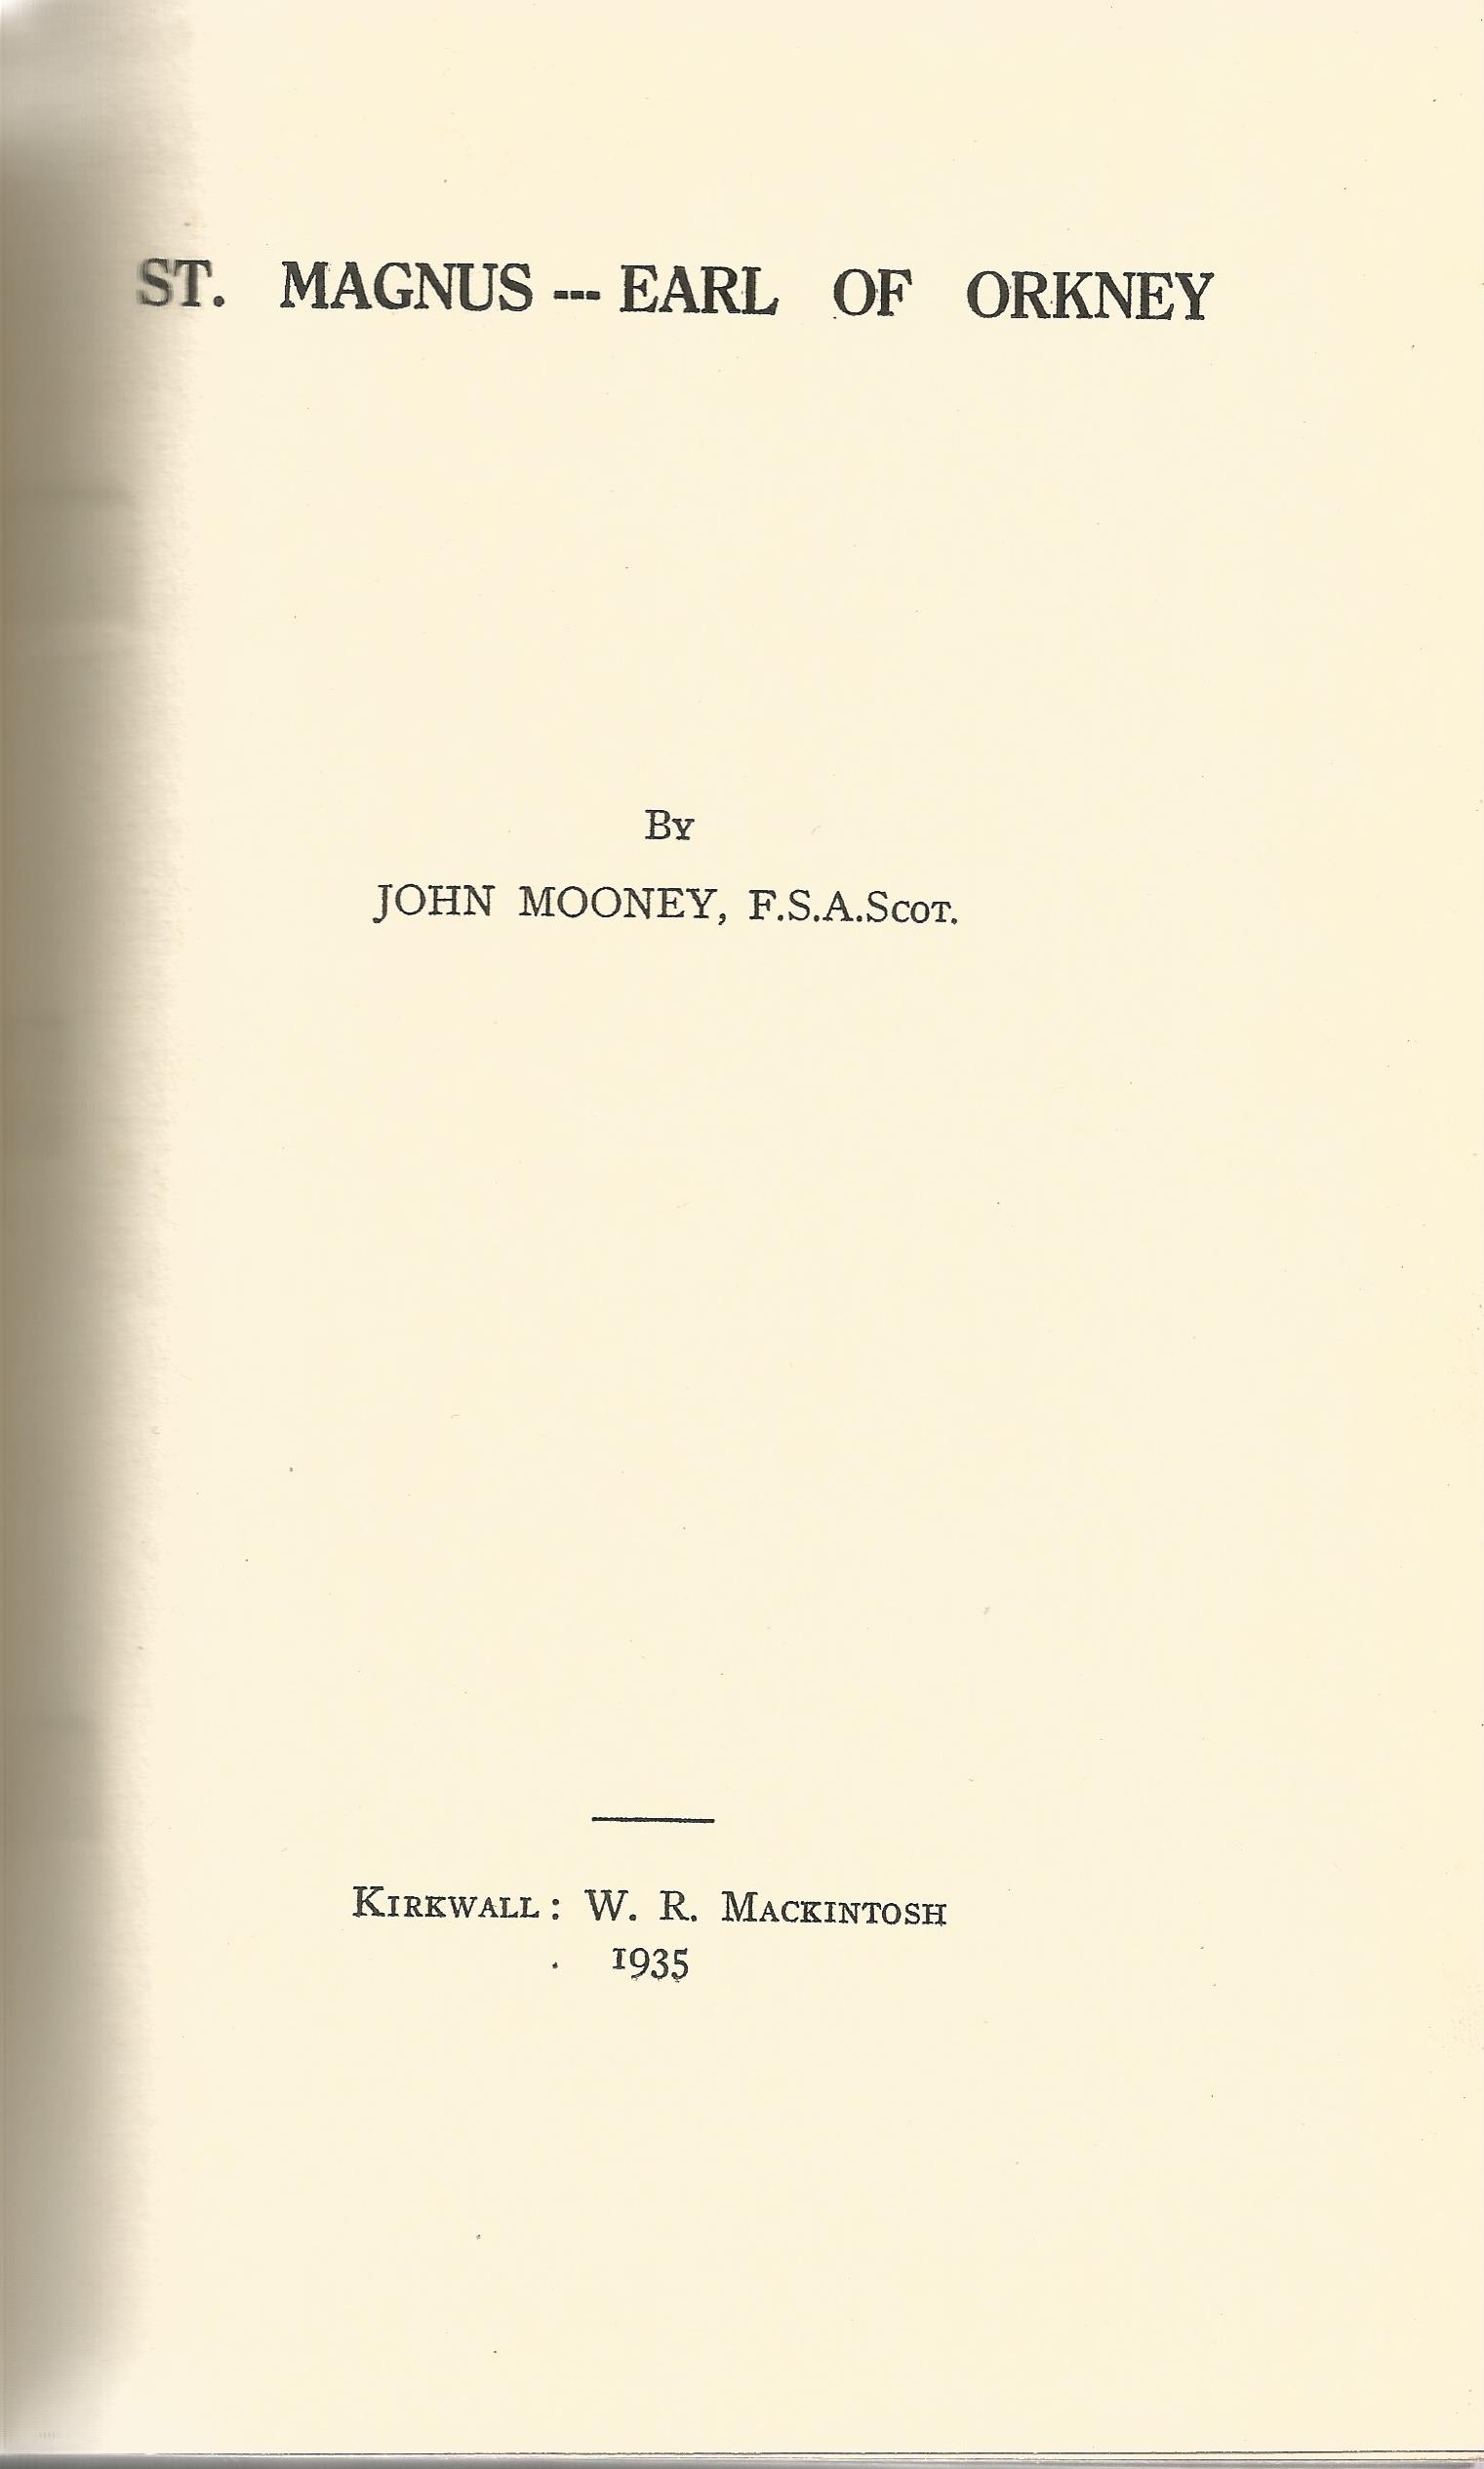 St Magnus Earl of Orkney by John Mooney 1935 Hardback Book published by Kirkwall: W R Mackintosh - Image 2 of 2